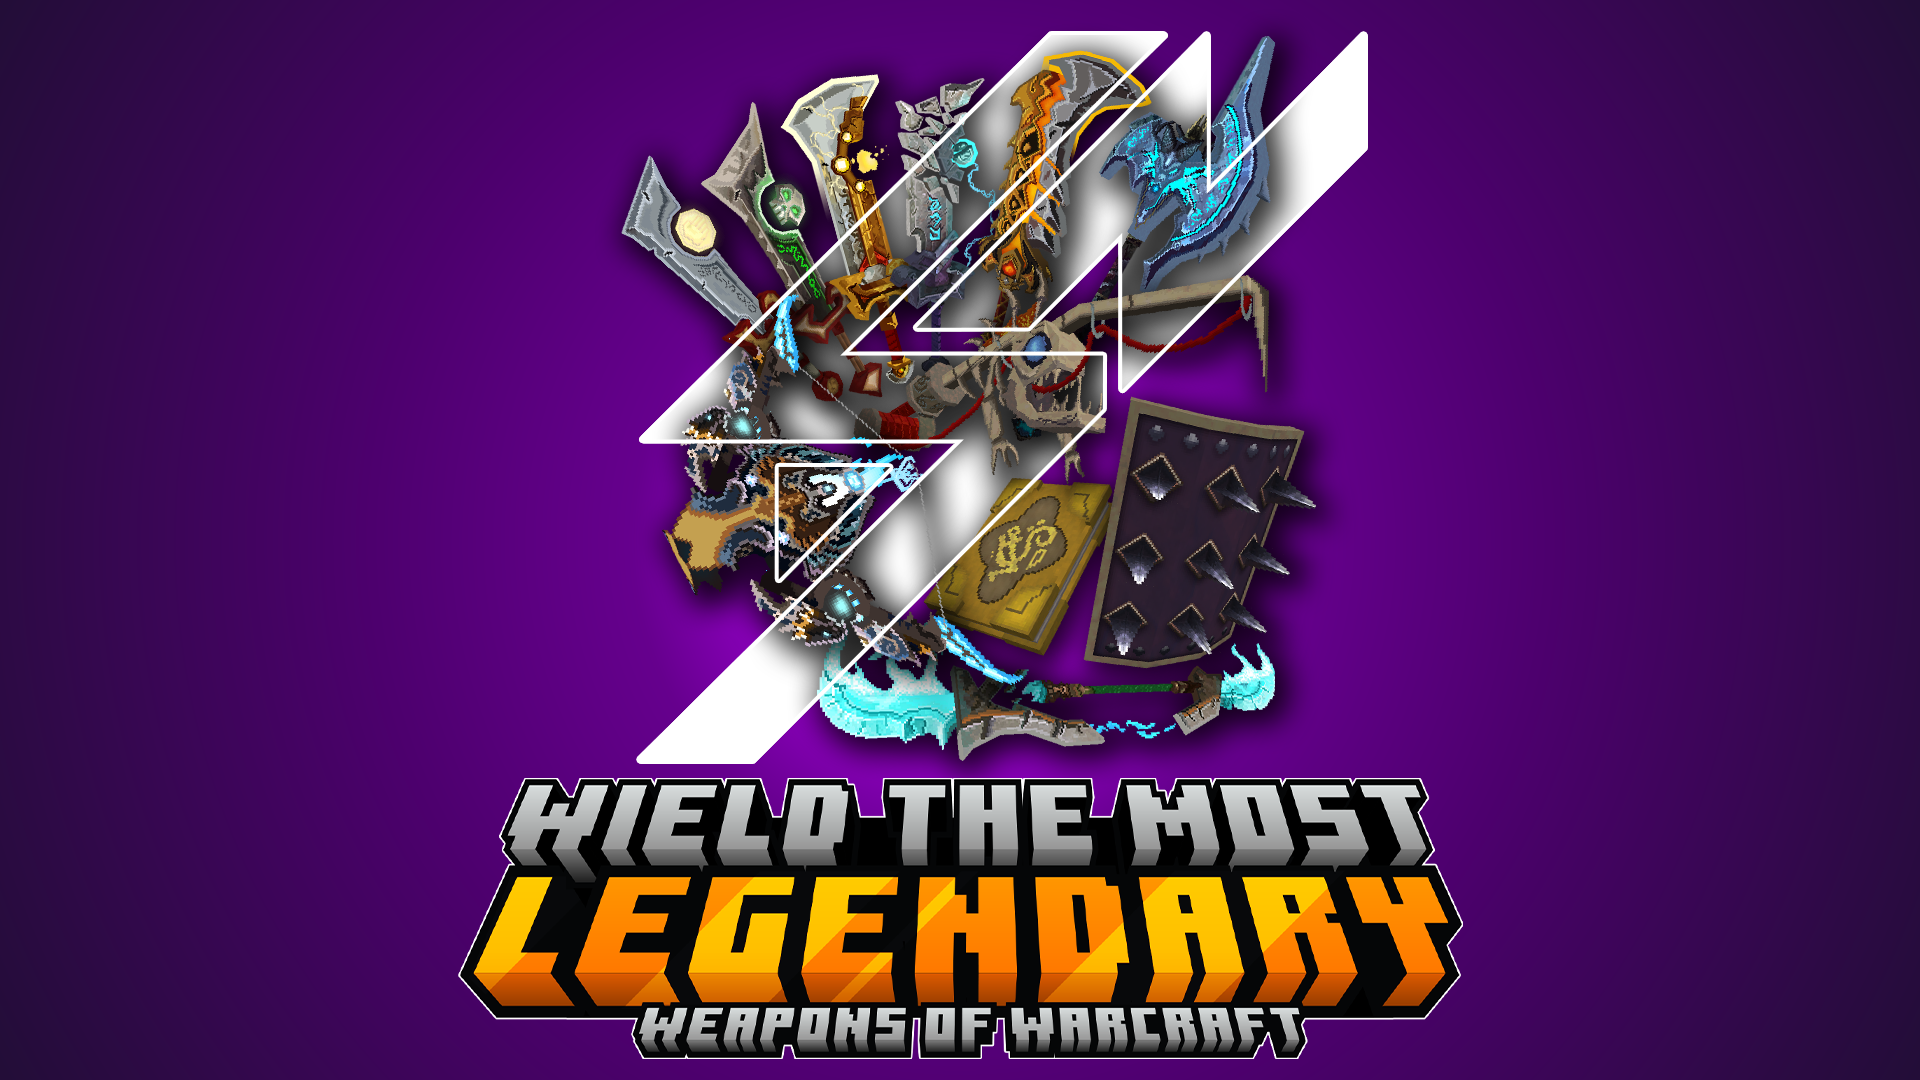 V2 Promo - Wield the most LEGENDARY weapons of Warcraft!